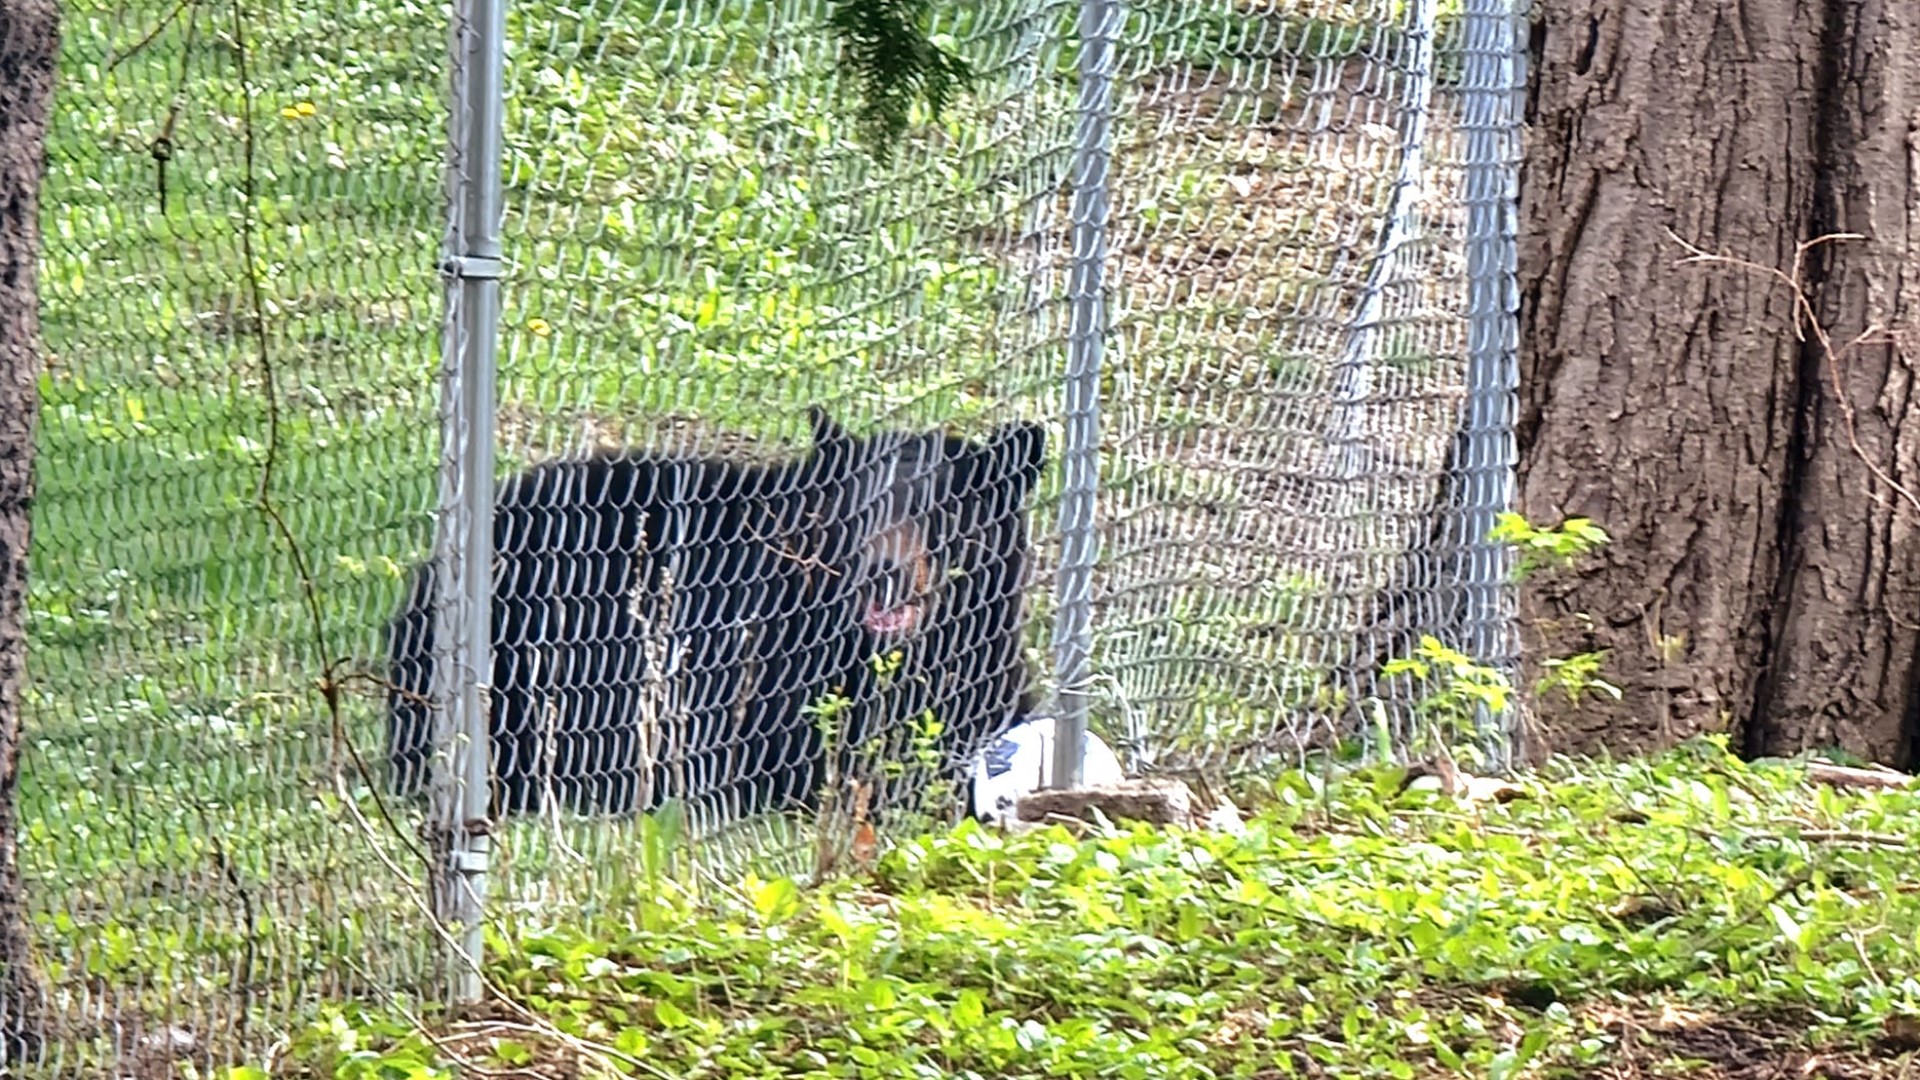 Officers responded and located the black bear in a densely-populated neighborhood with a potentially injured front paw.